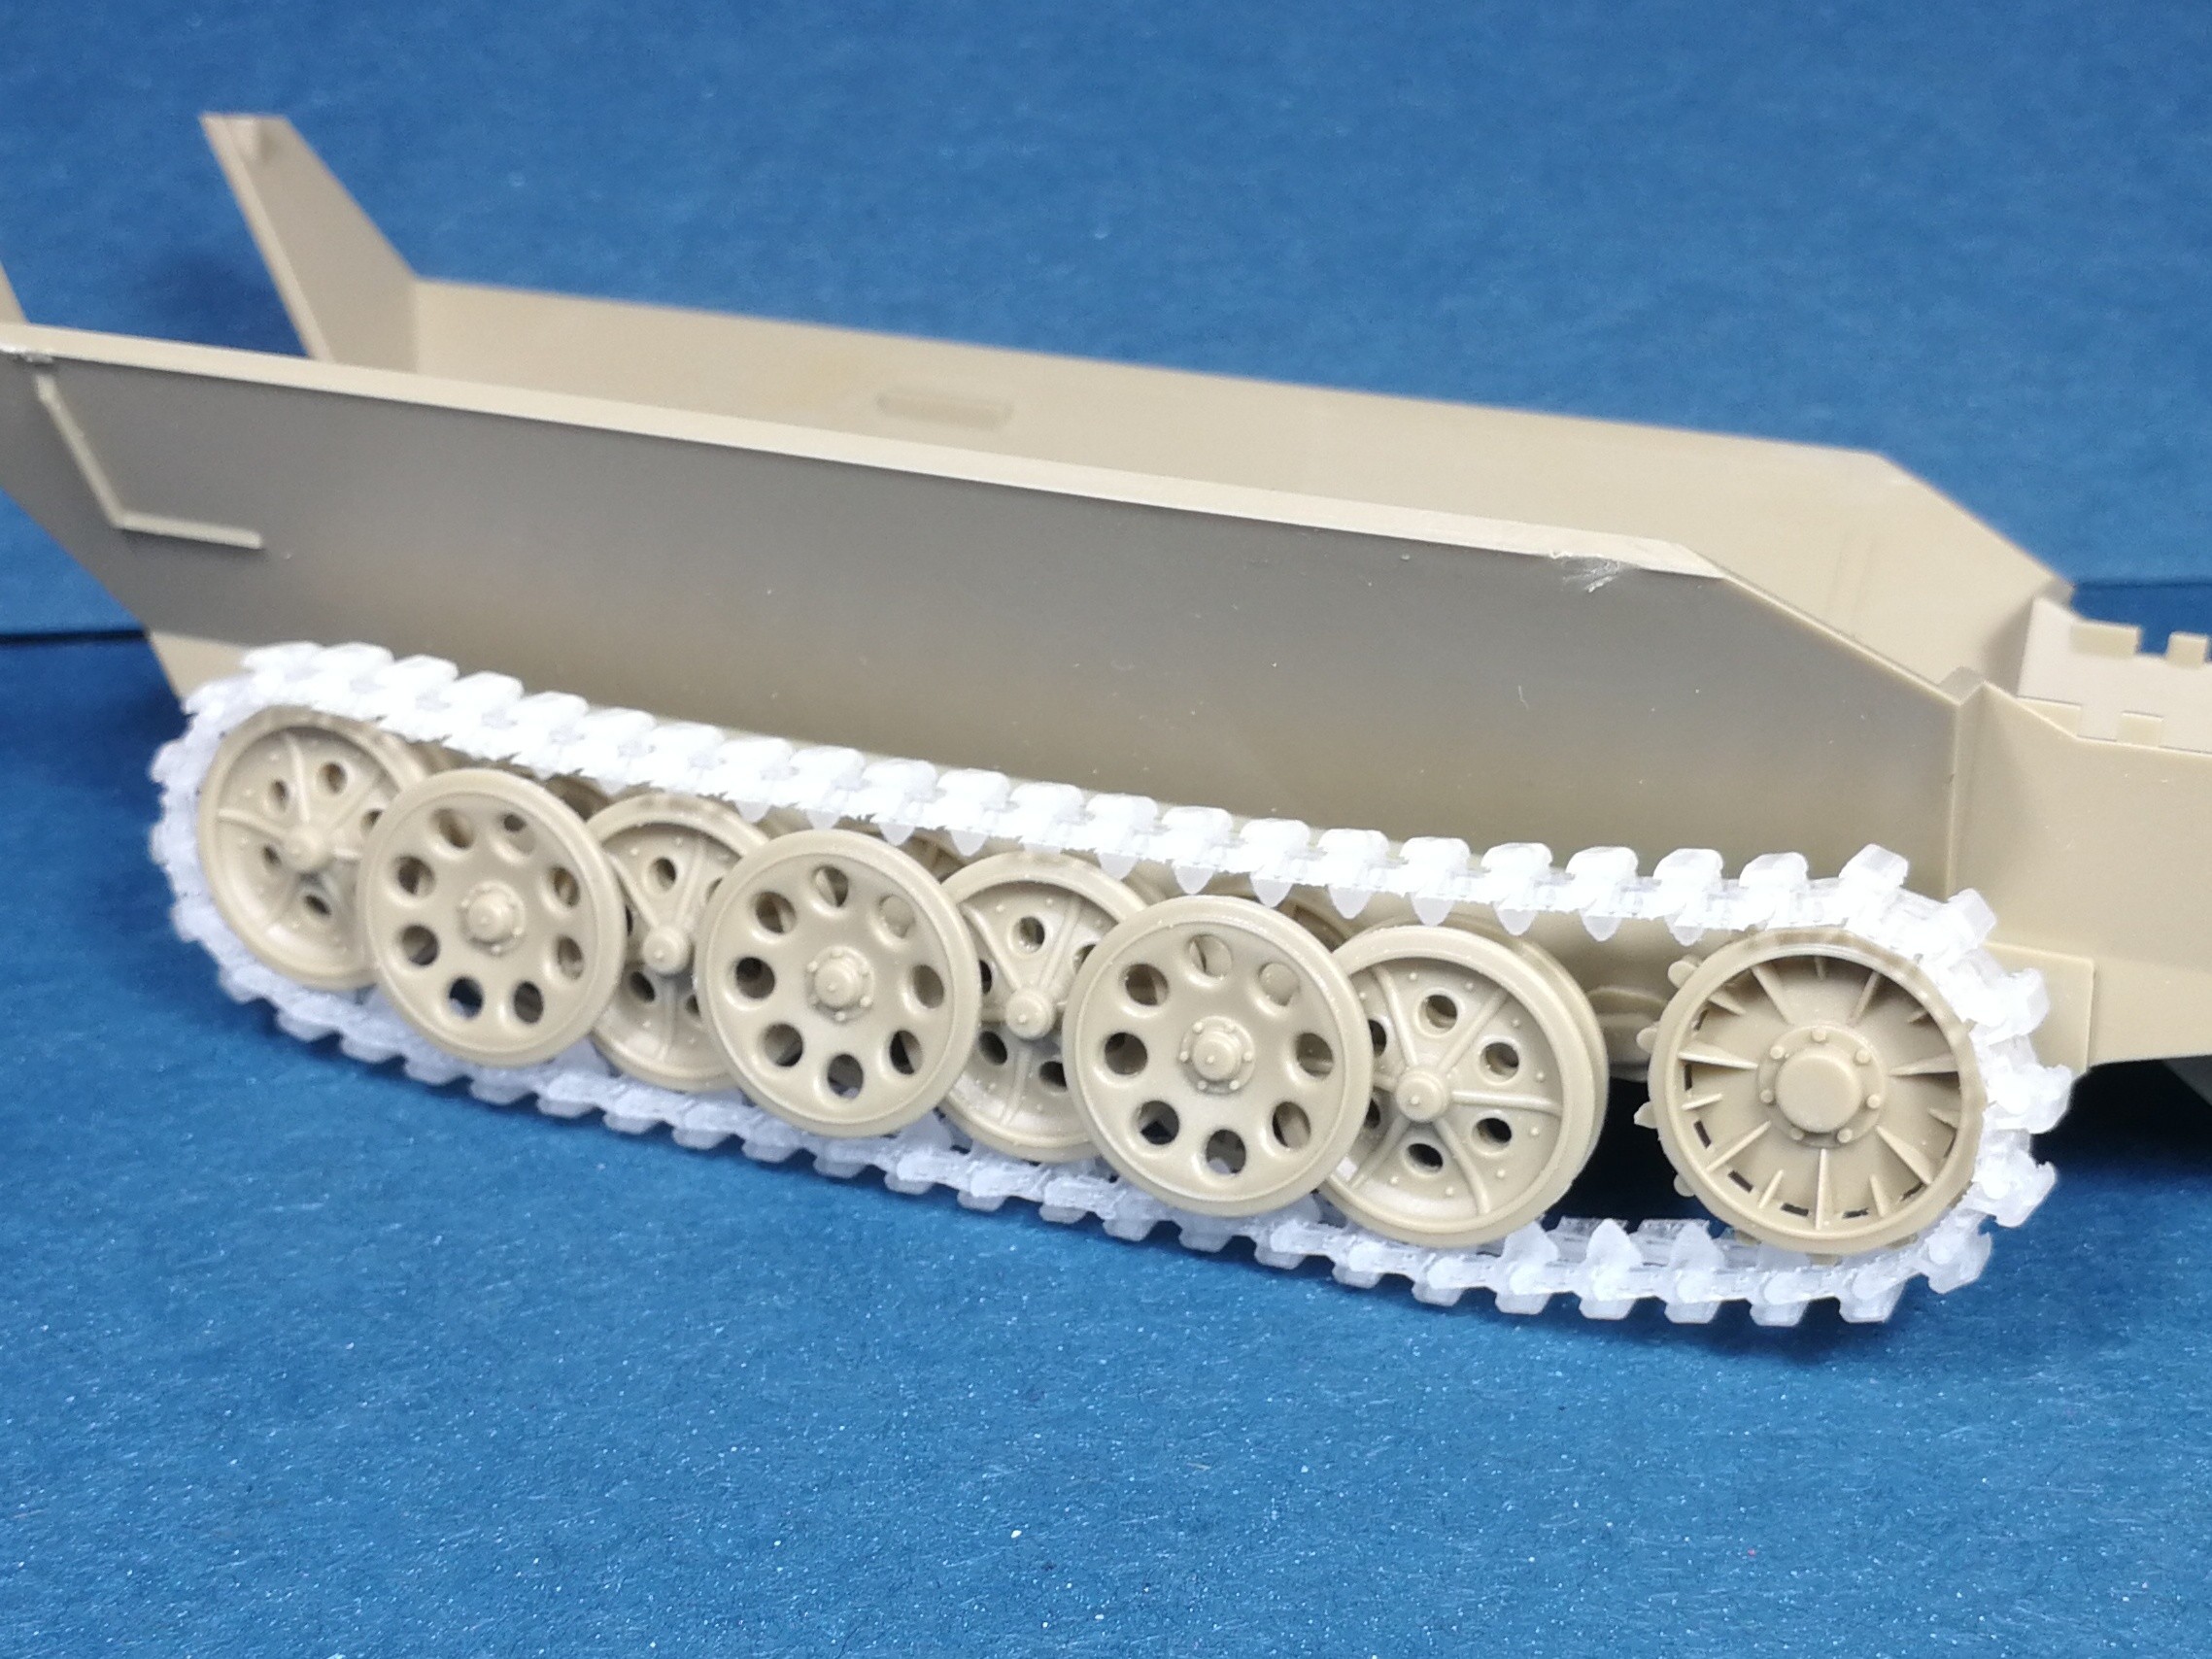 TR35015 3D printed workable tracks for Tamiya Sd.Kfz.251 ausf.C/D. They come assembled.